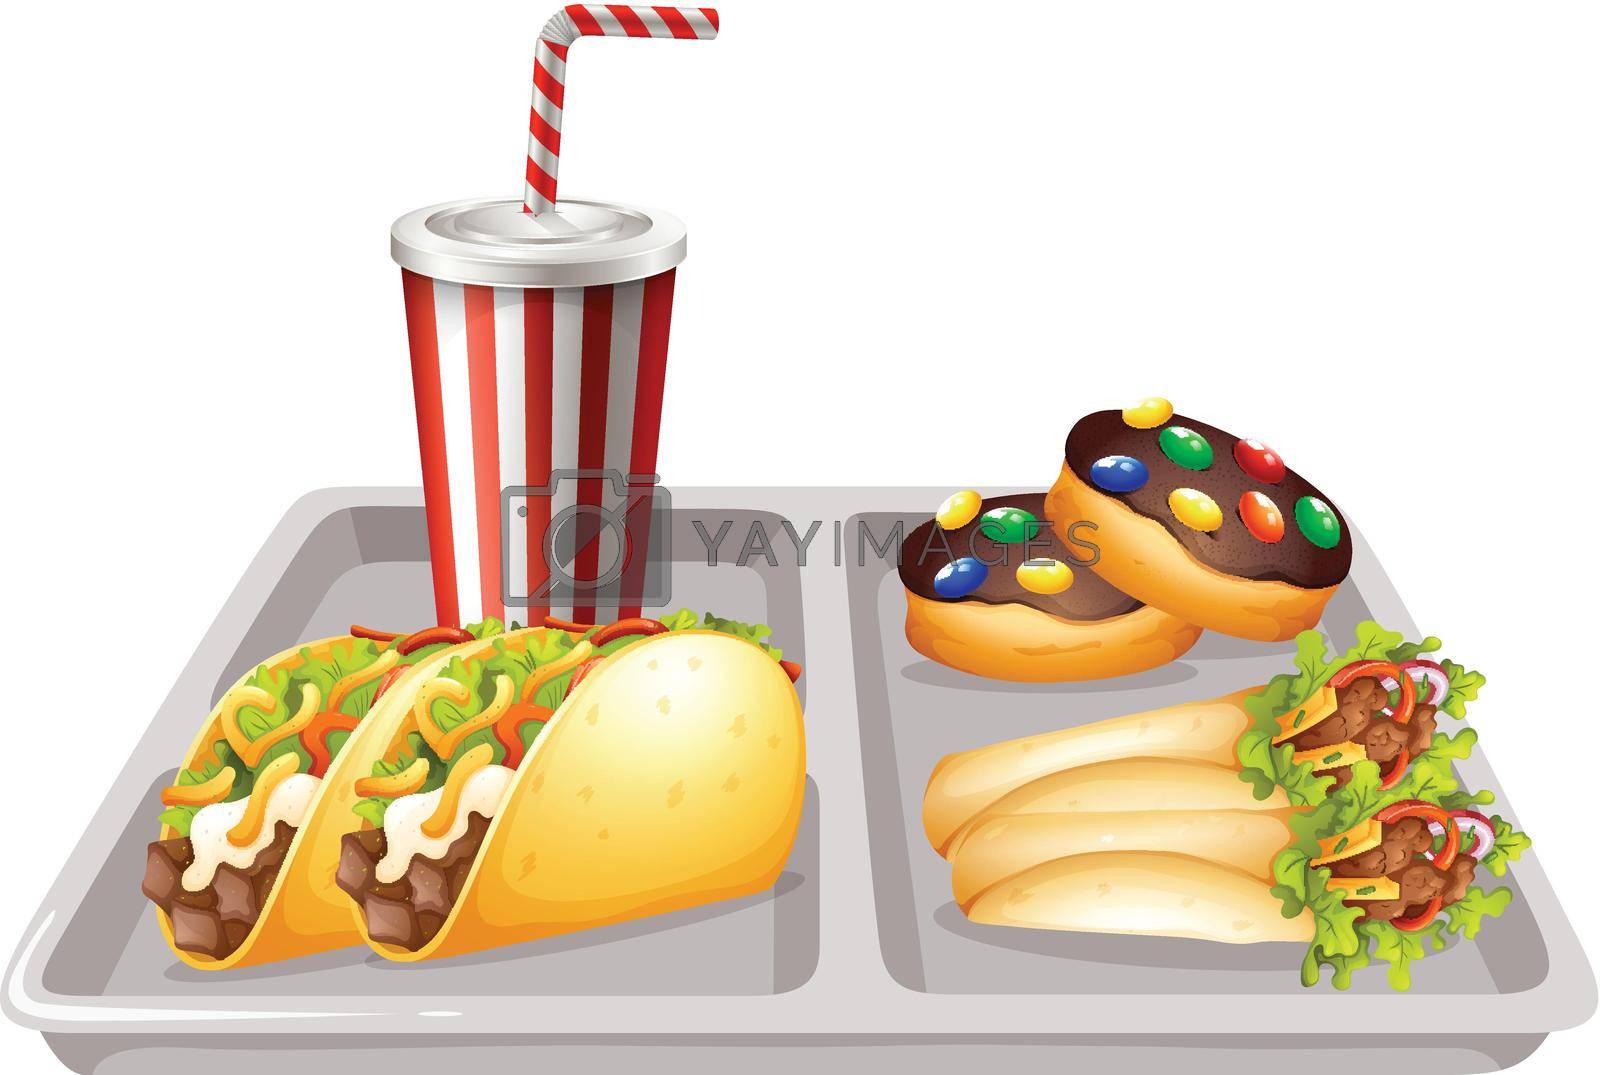 Tray of food and drink illustration